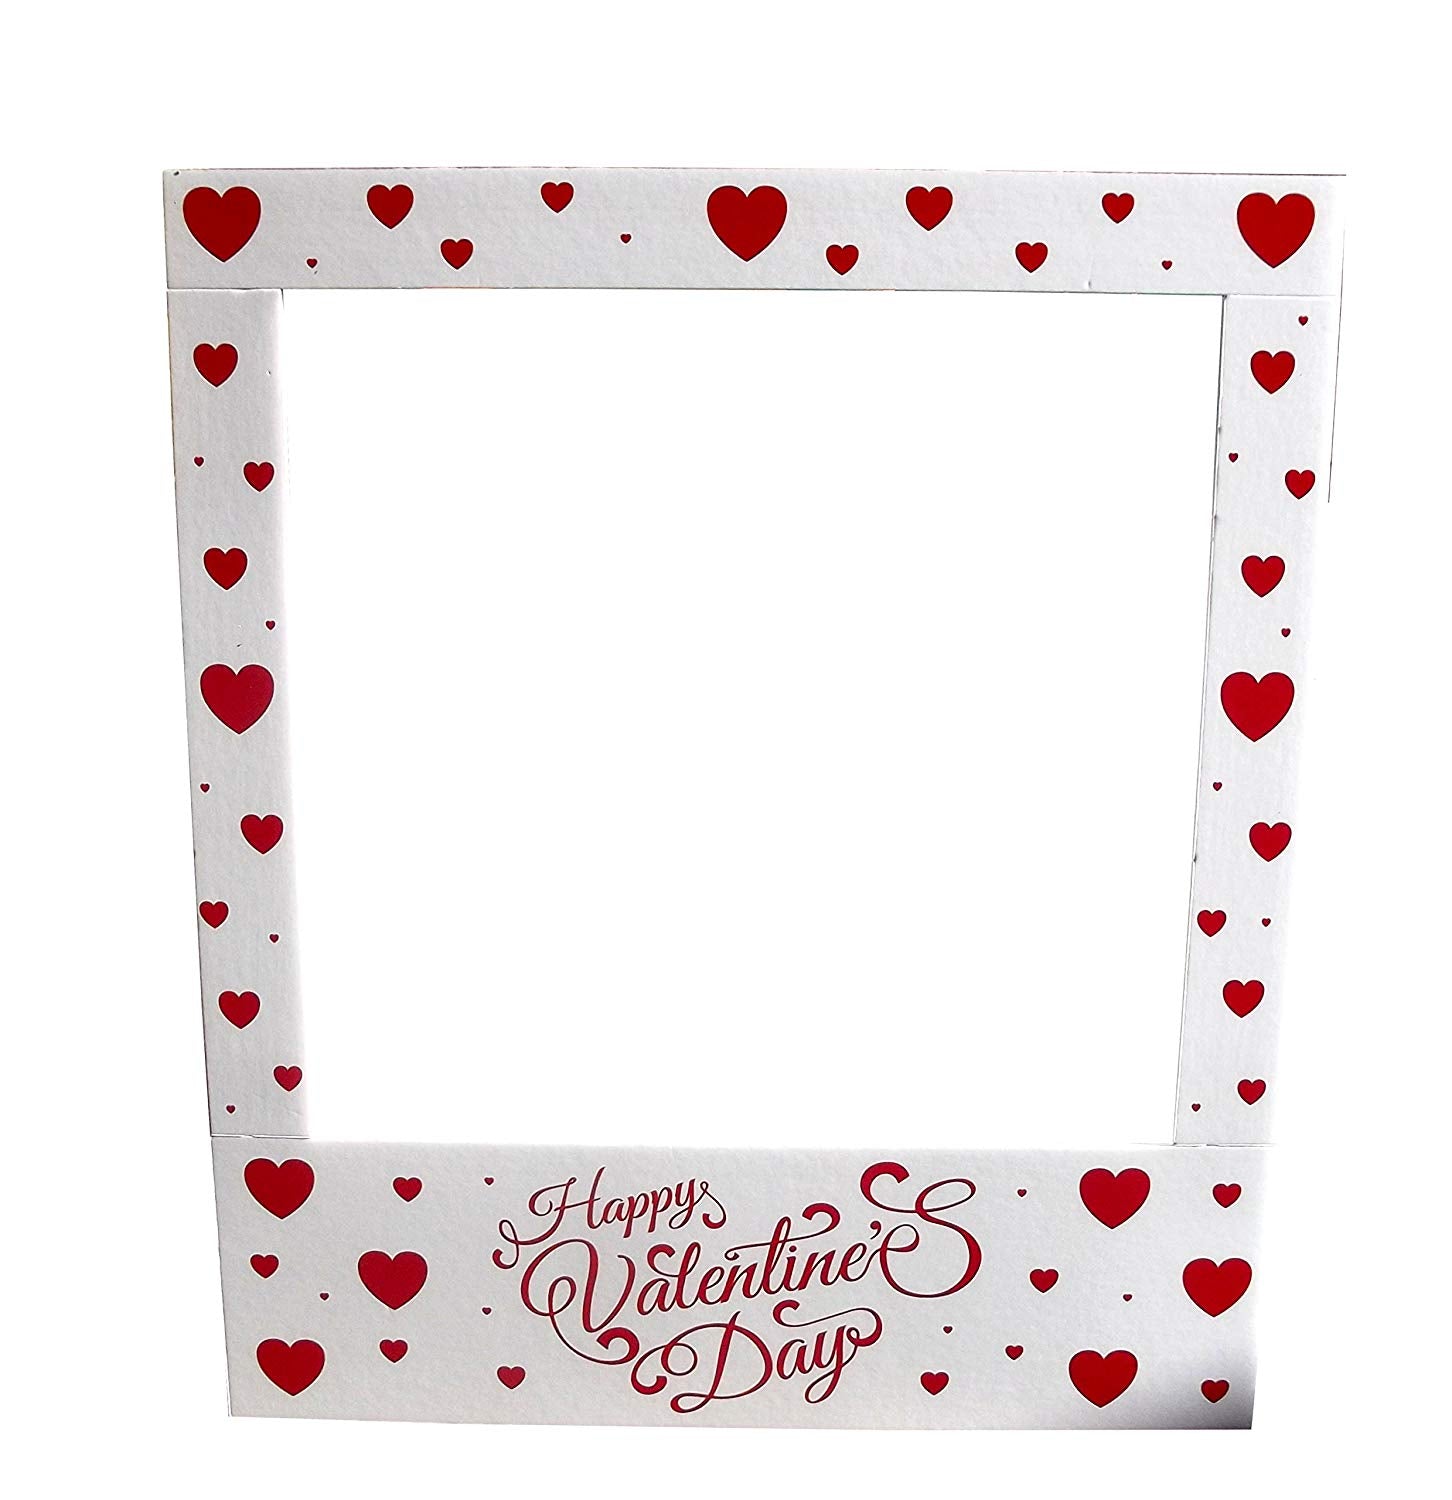 Engraving Valentines Day Party Frame Photo Prop aahs! 35 X 30 inches Love You to The Moon and Back 